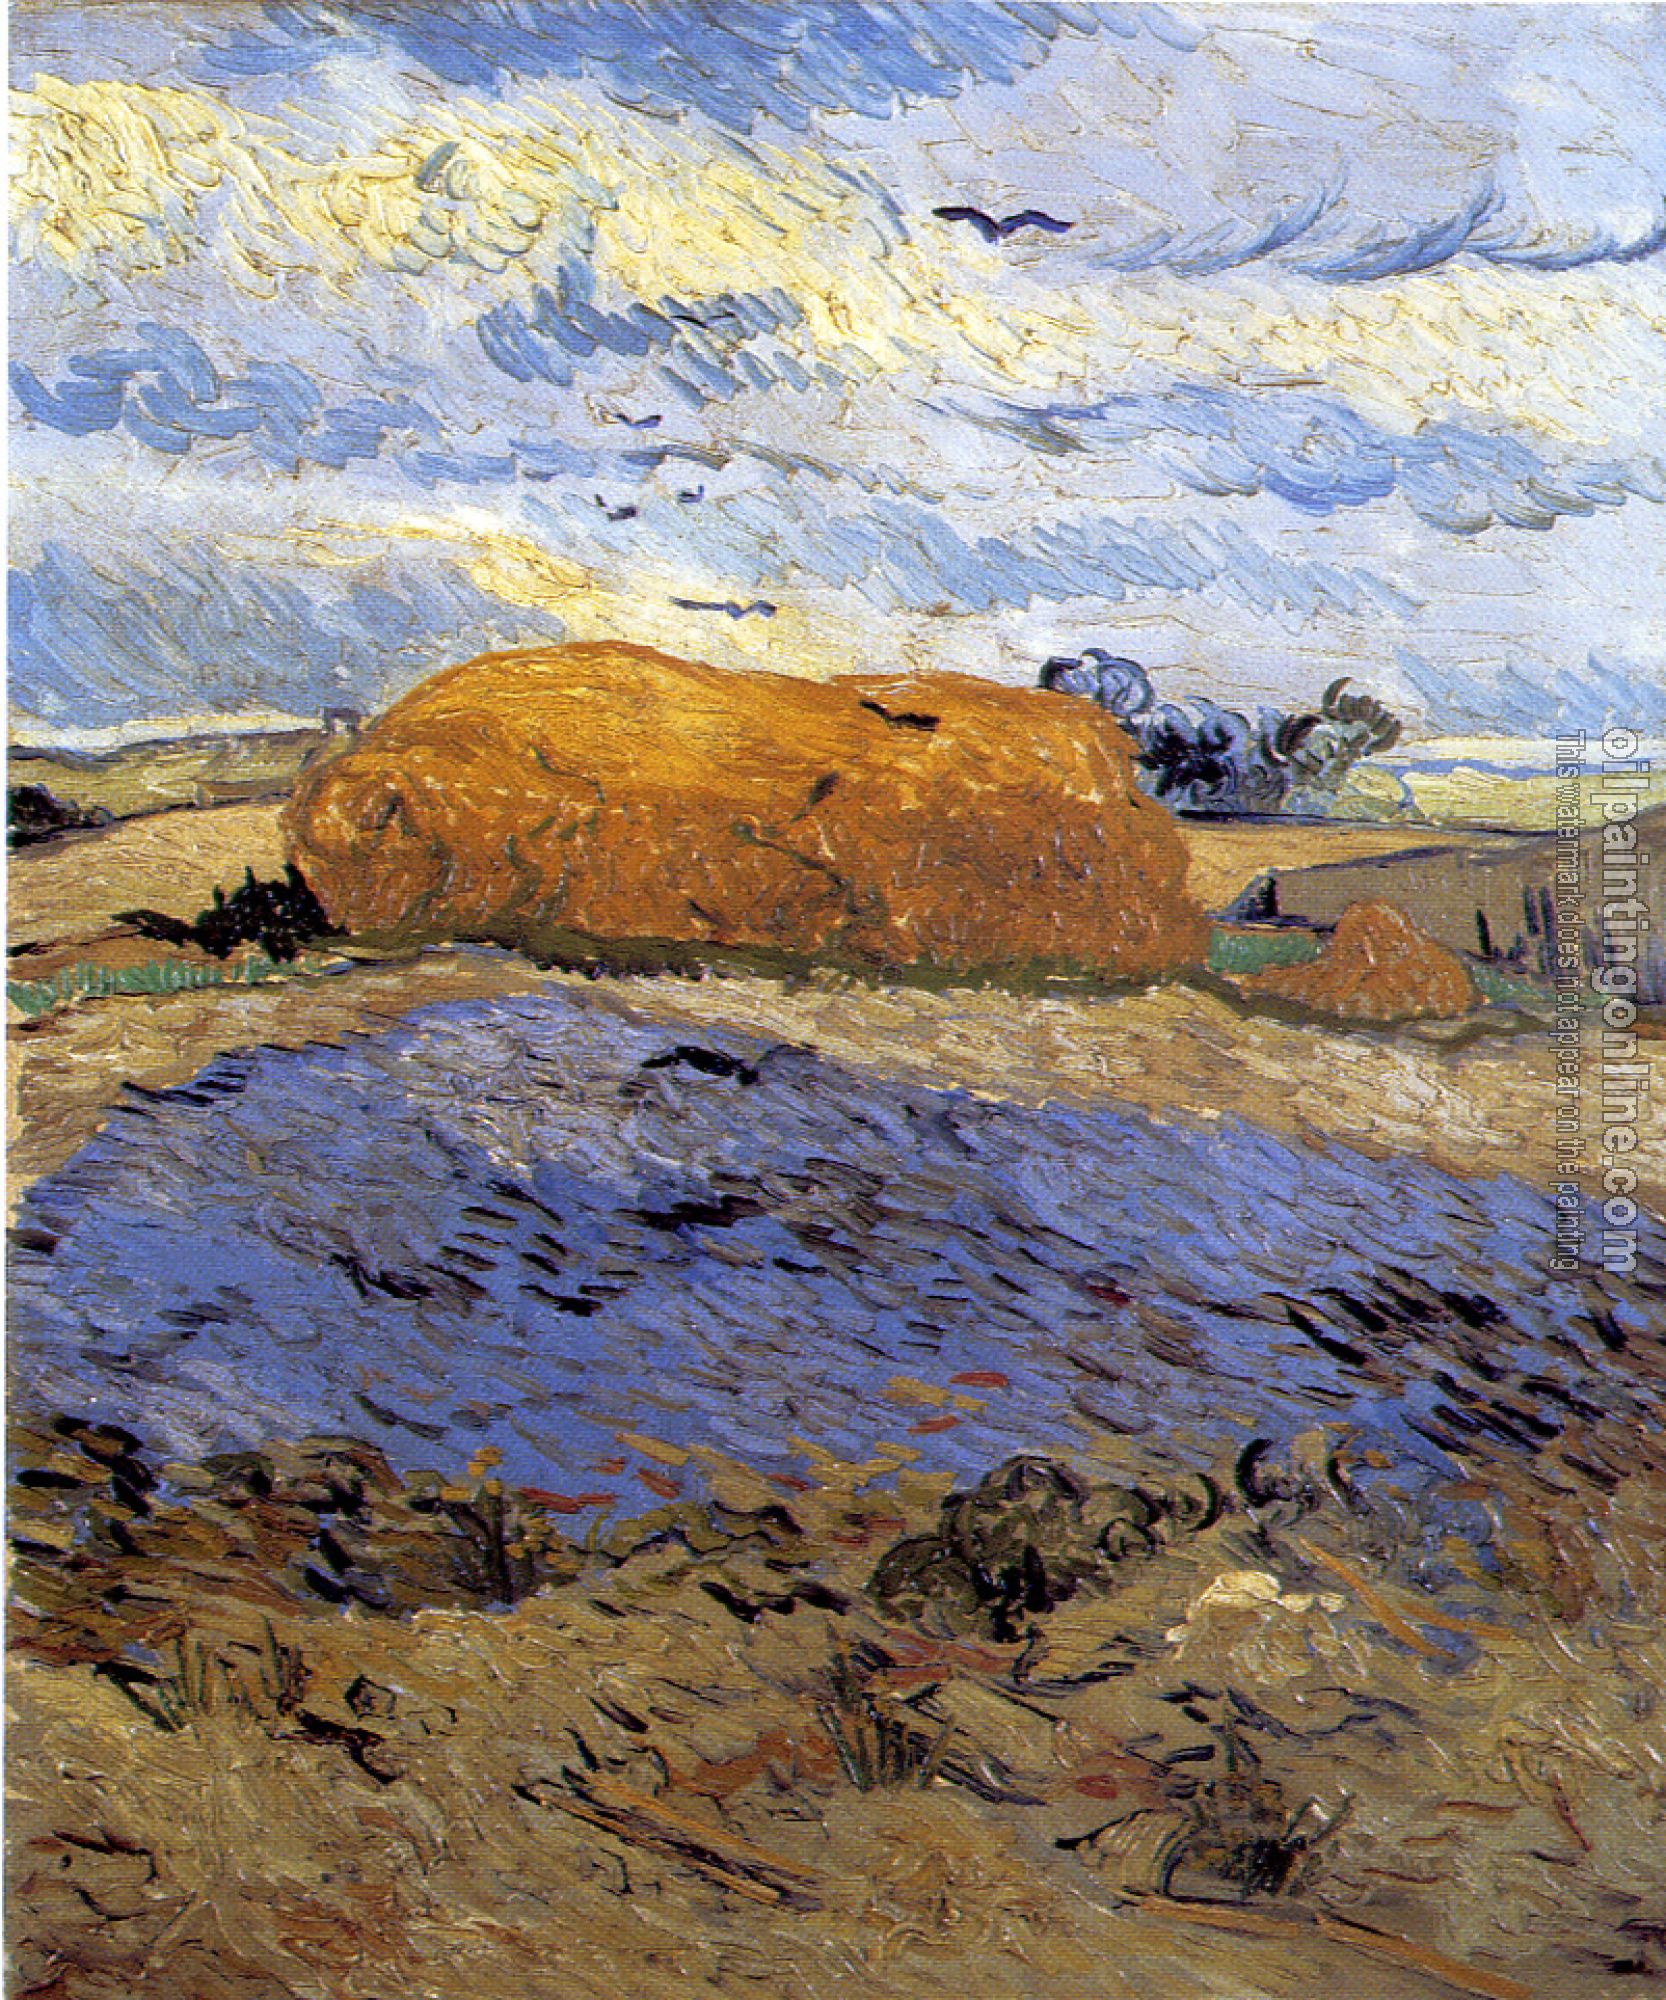 Gogh, Vincent van - Field with a Stack of Wheat or Hay